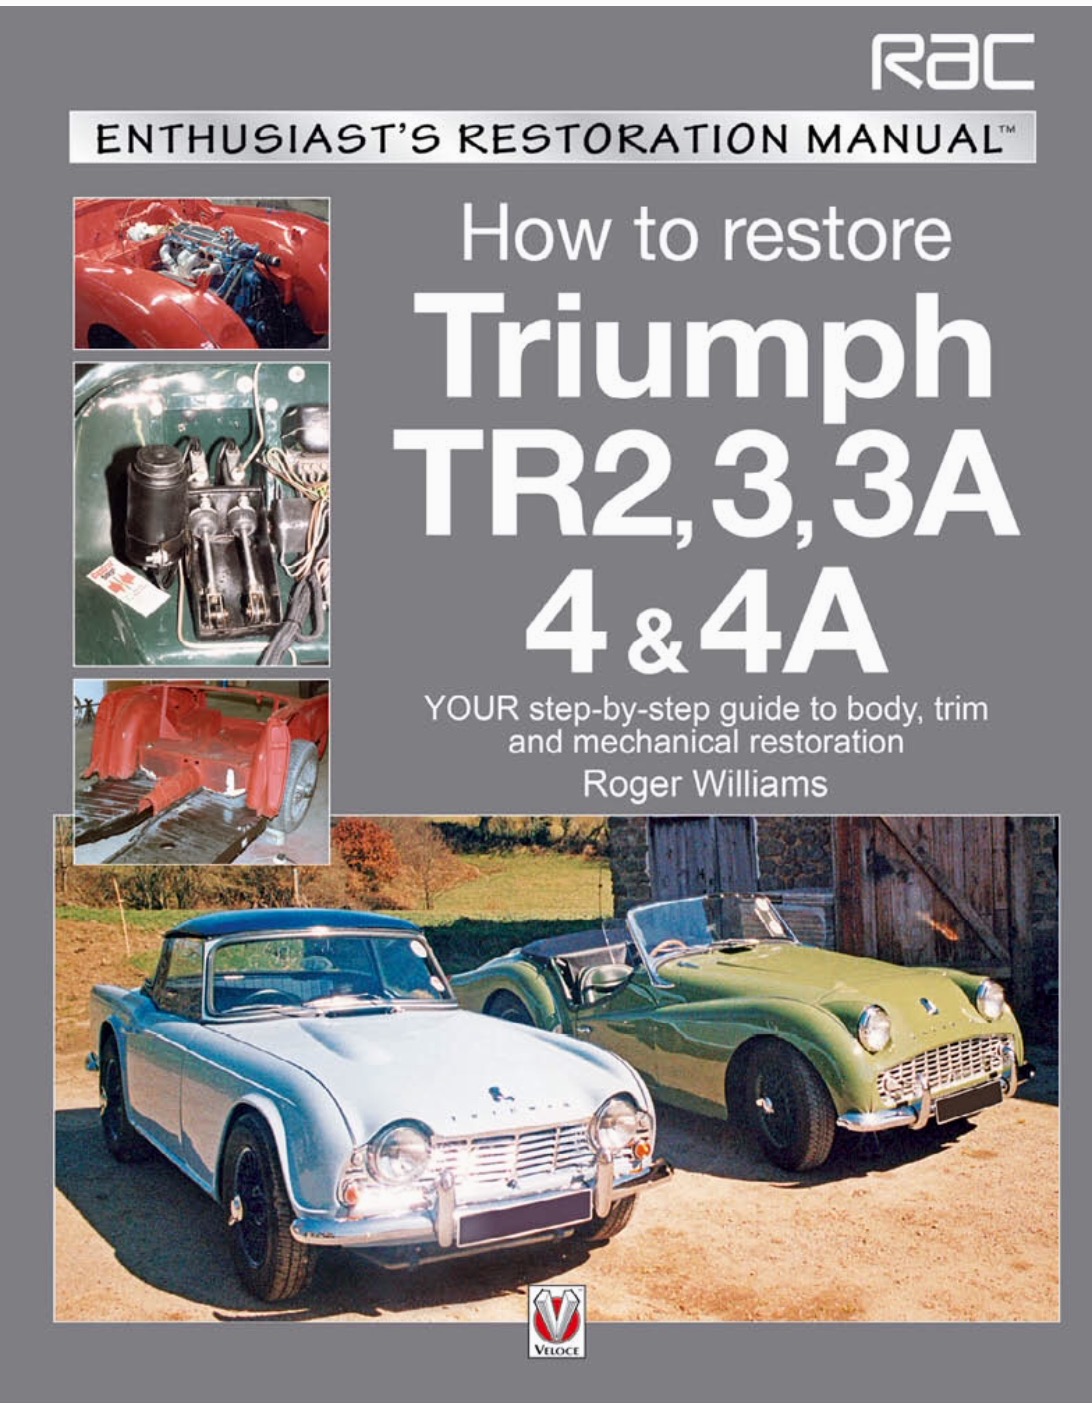 Triumph TR2, 3, 3A, 4 & 4A - Enthusiast's Restoration Manual by Roger Williams